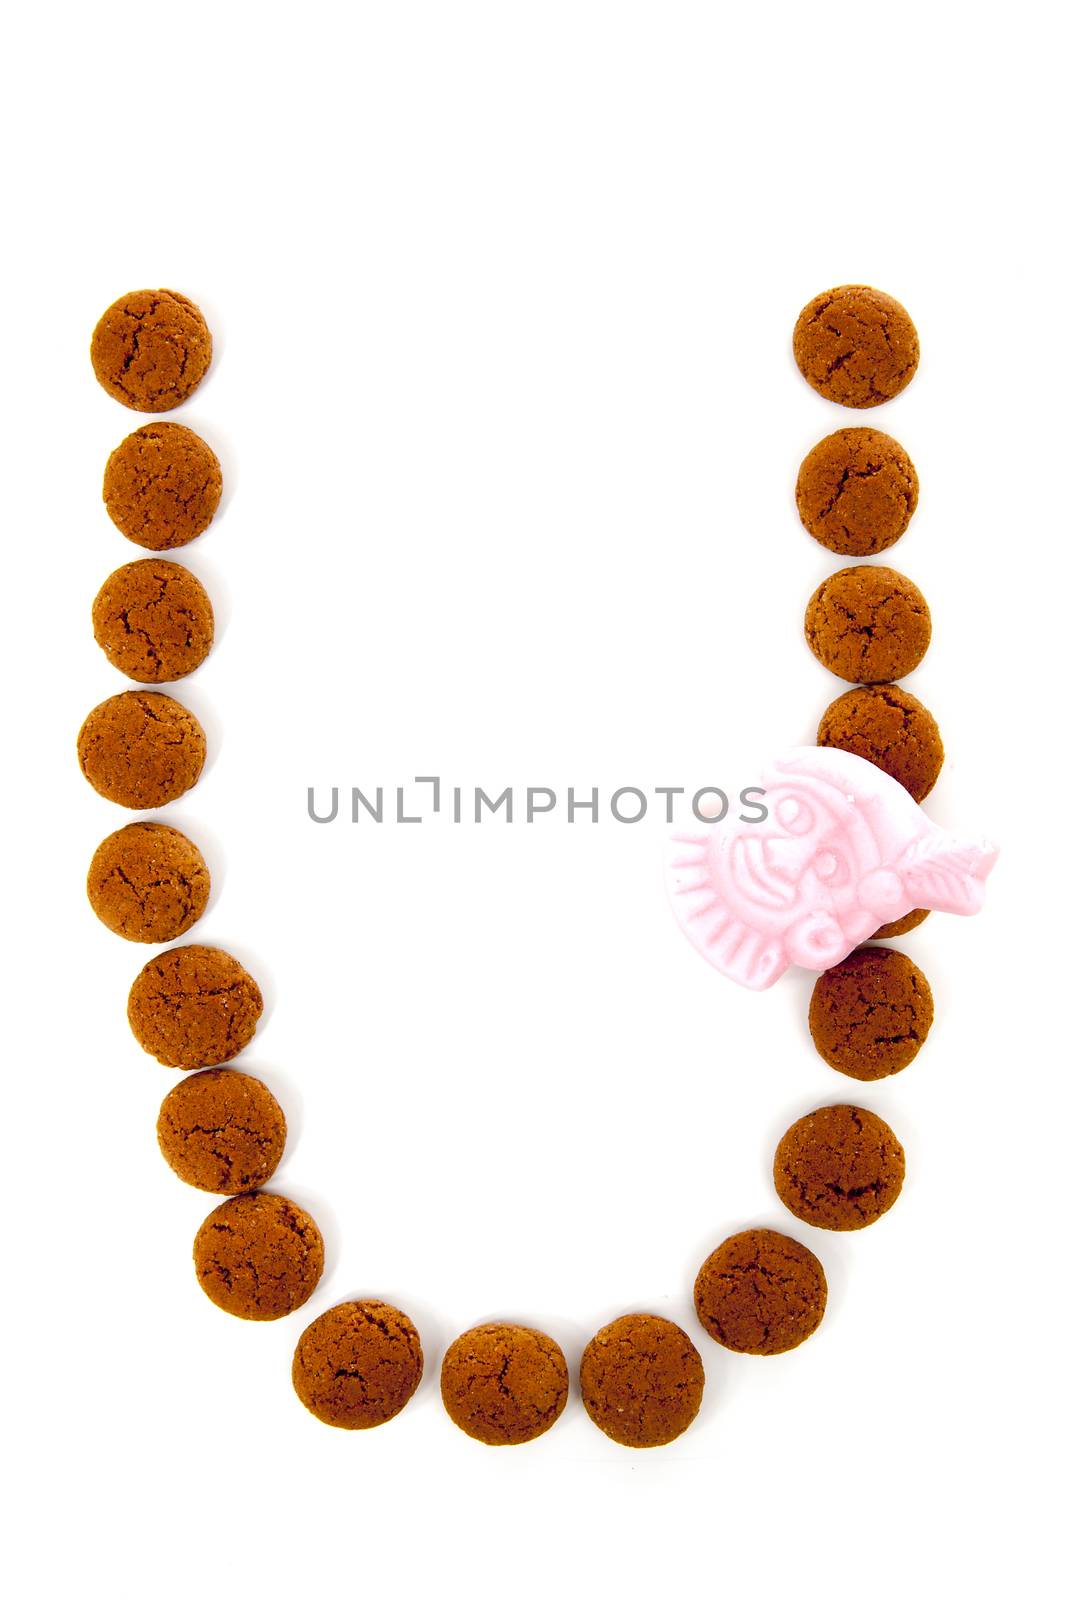 Ginger nuts, pepernoten, in the shape of letter U isolated on white background. Typical Dutch candy for Sinterklaas event in december